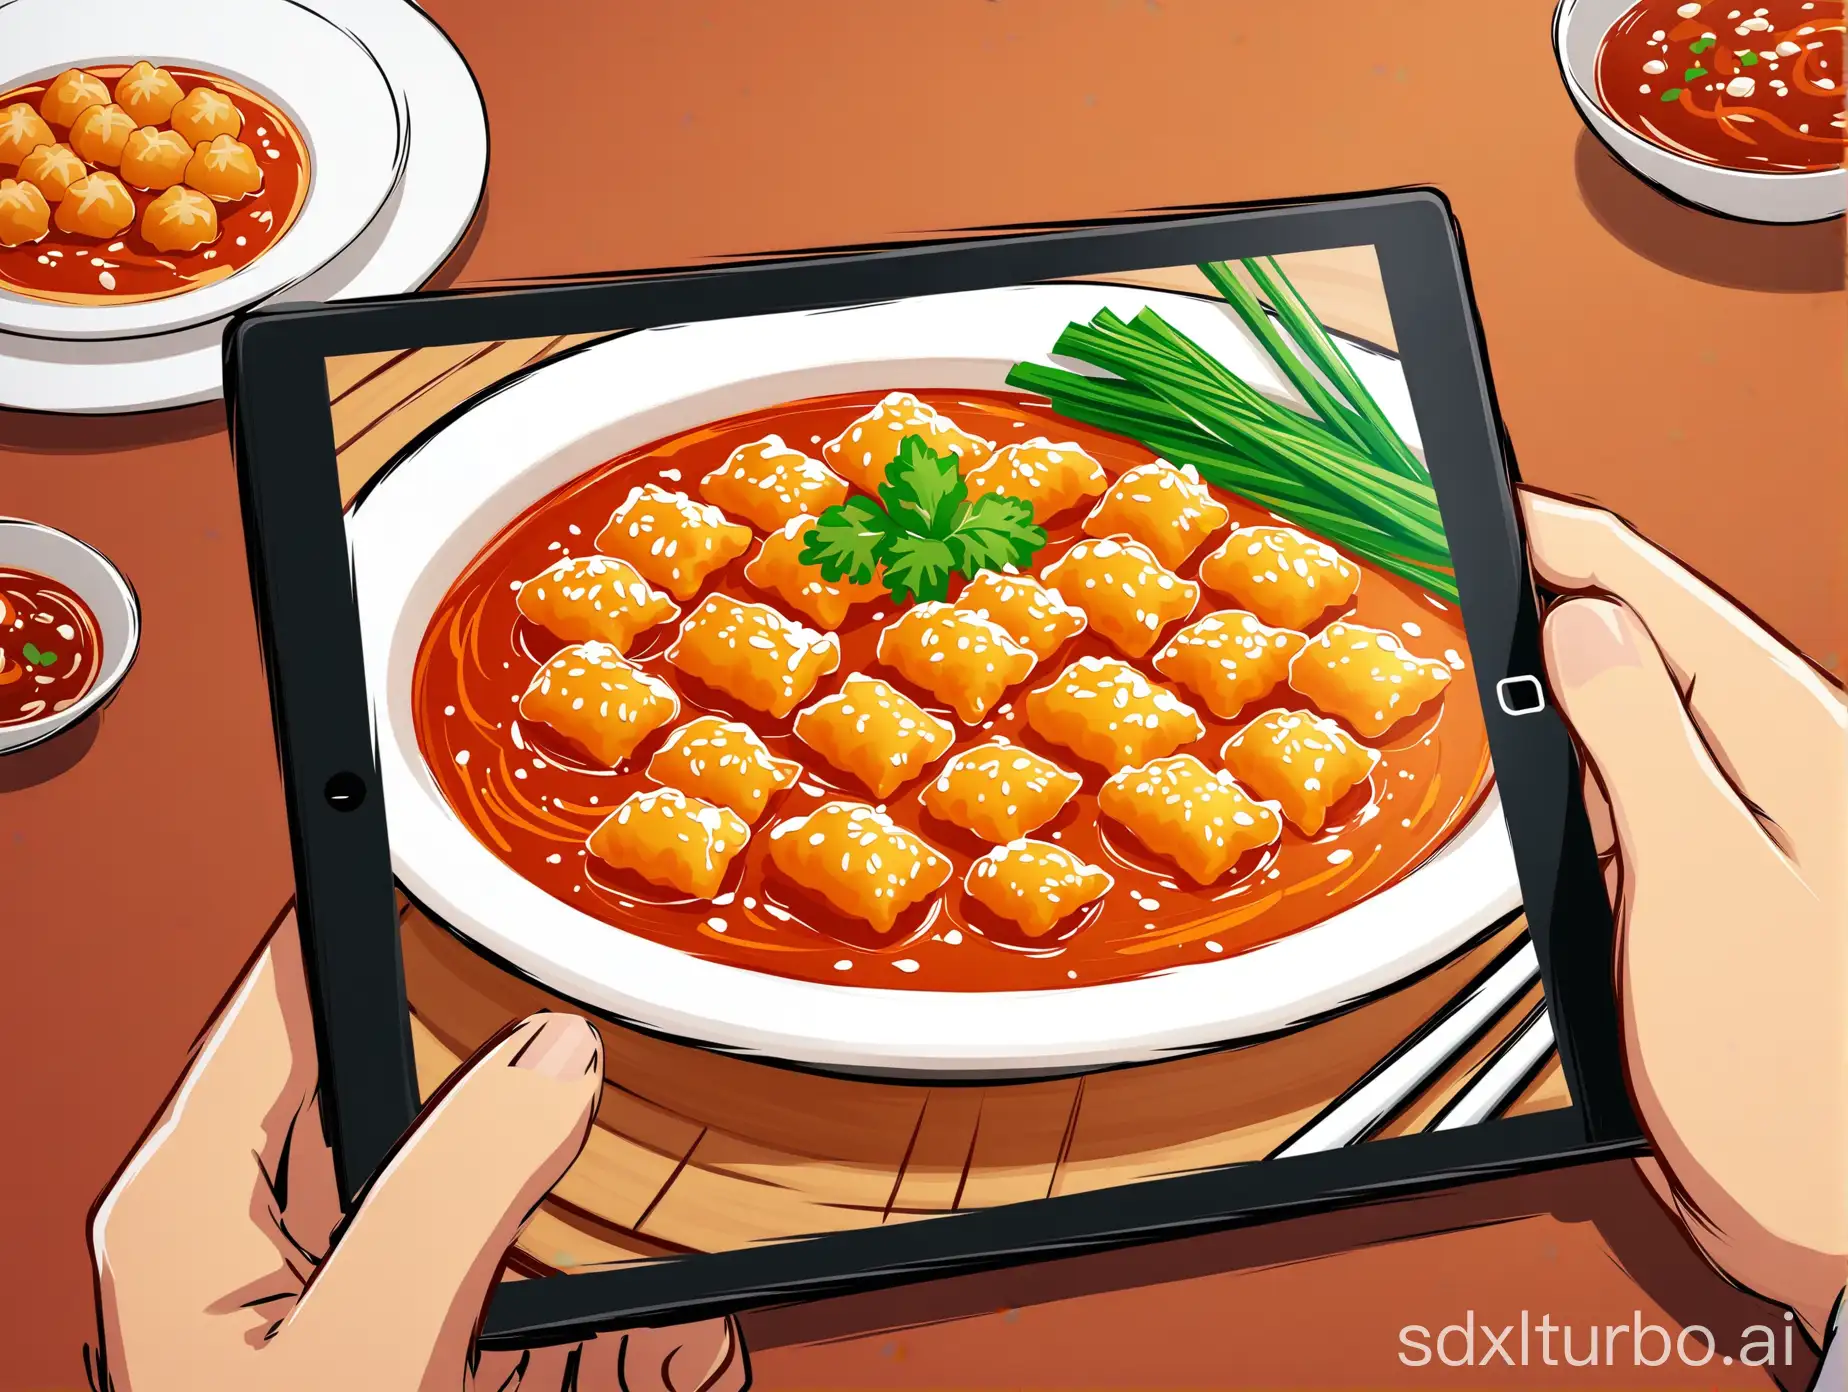 Draw a picture of Chinese Ninghai cuisine as the video cover